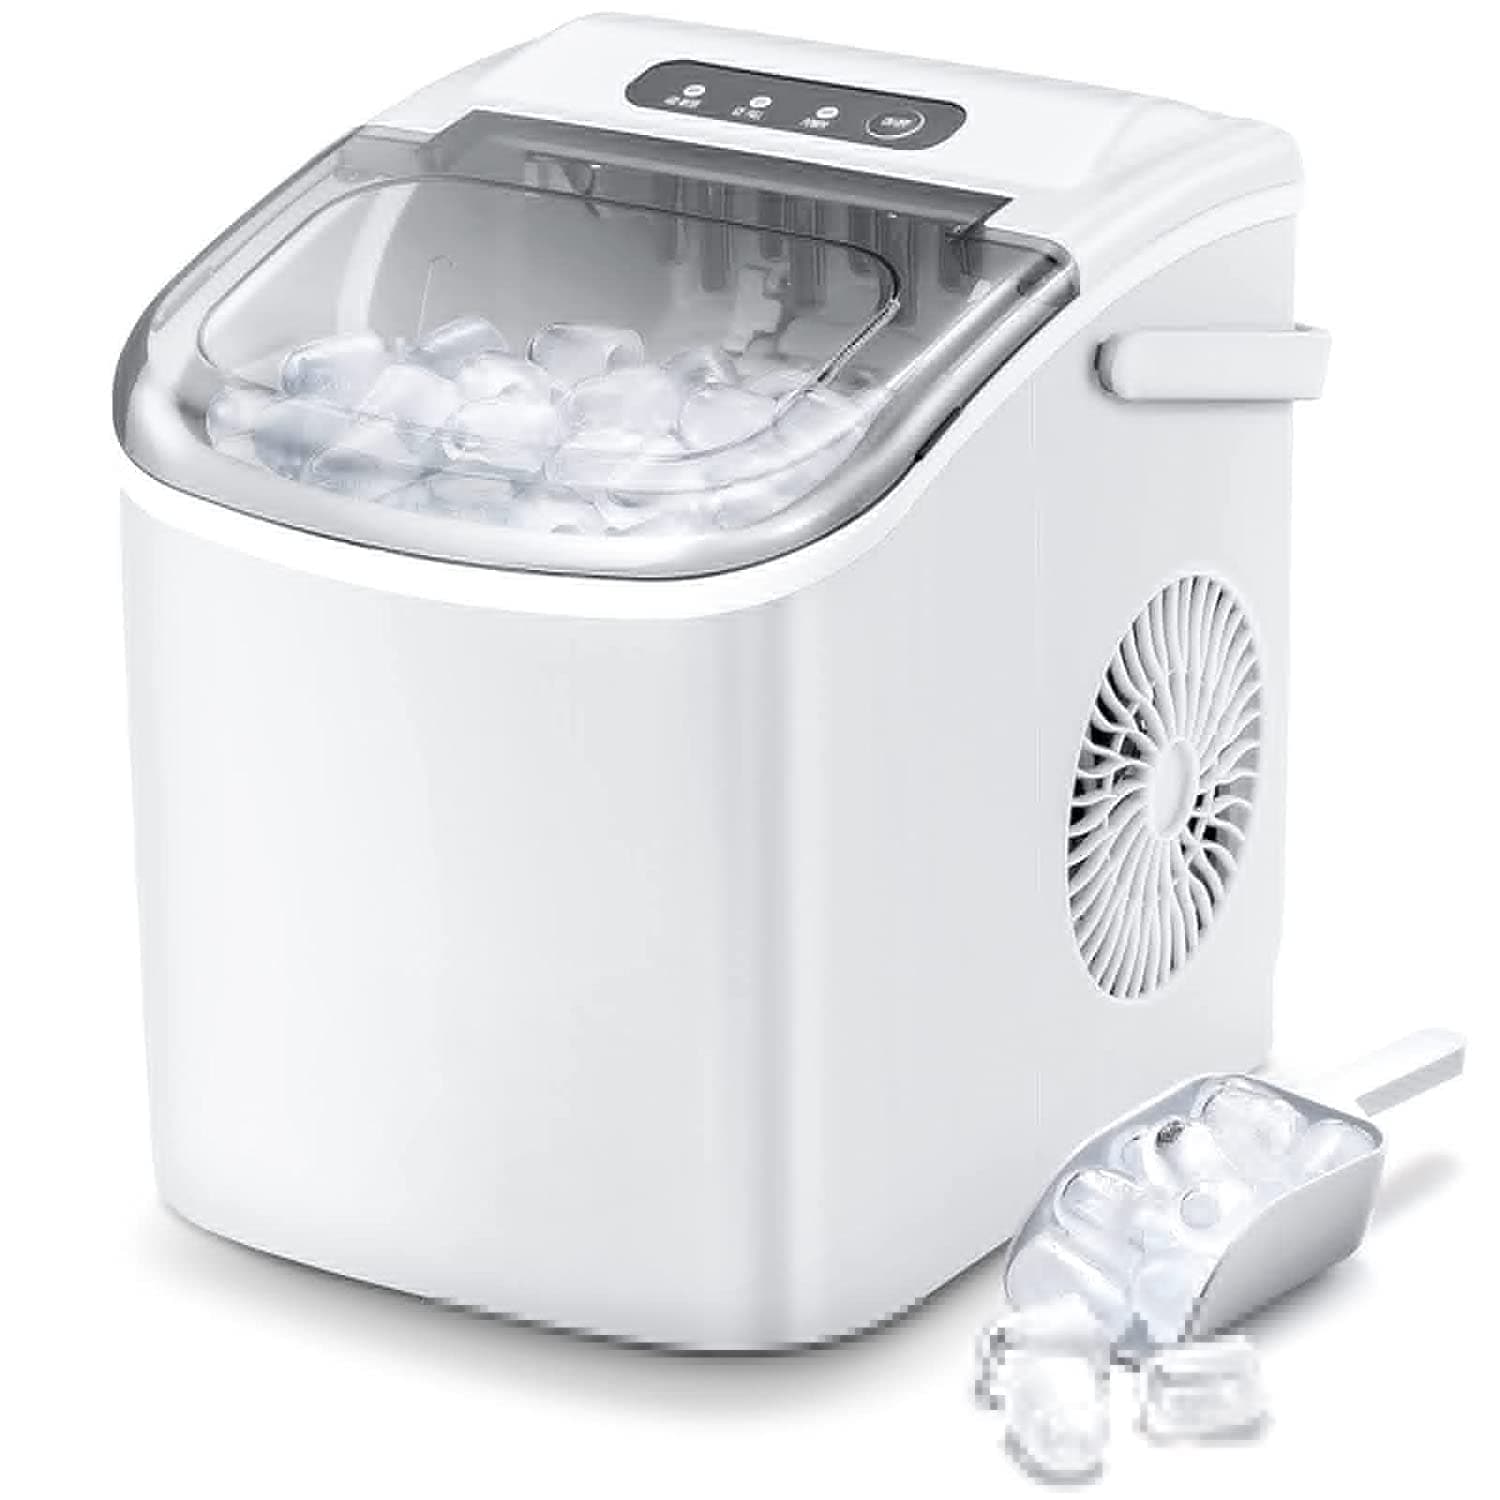 11 Common Questions About Portable Ice Makers